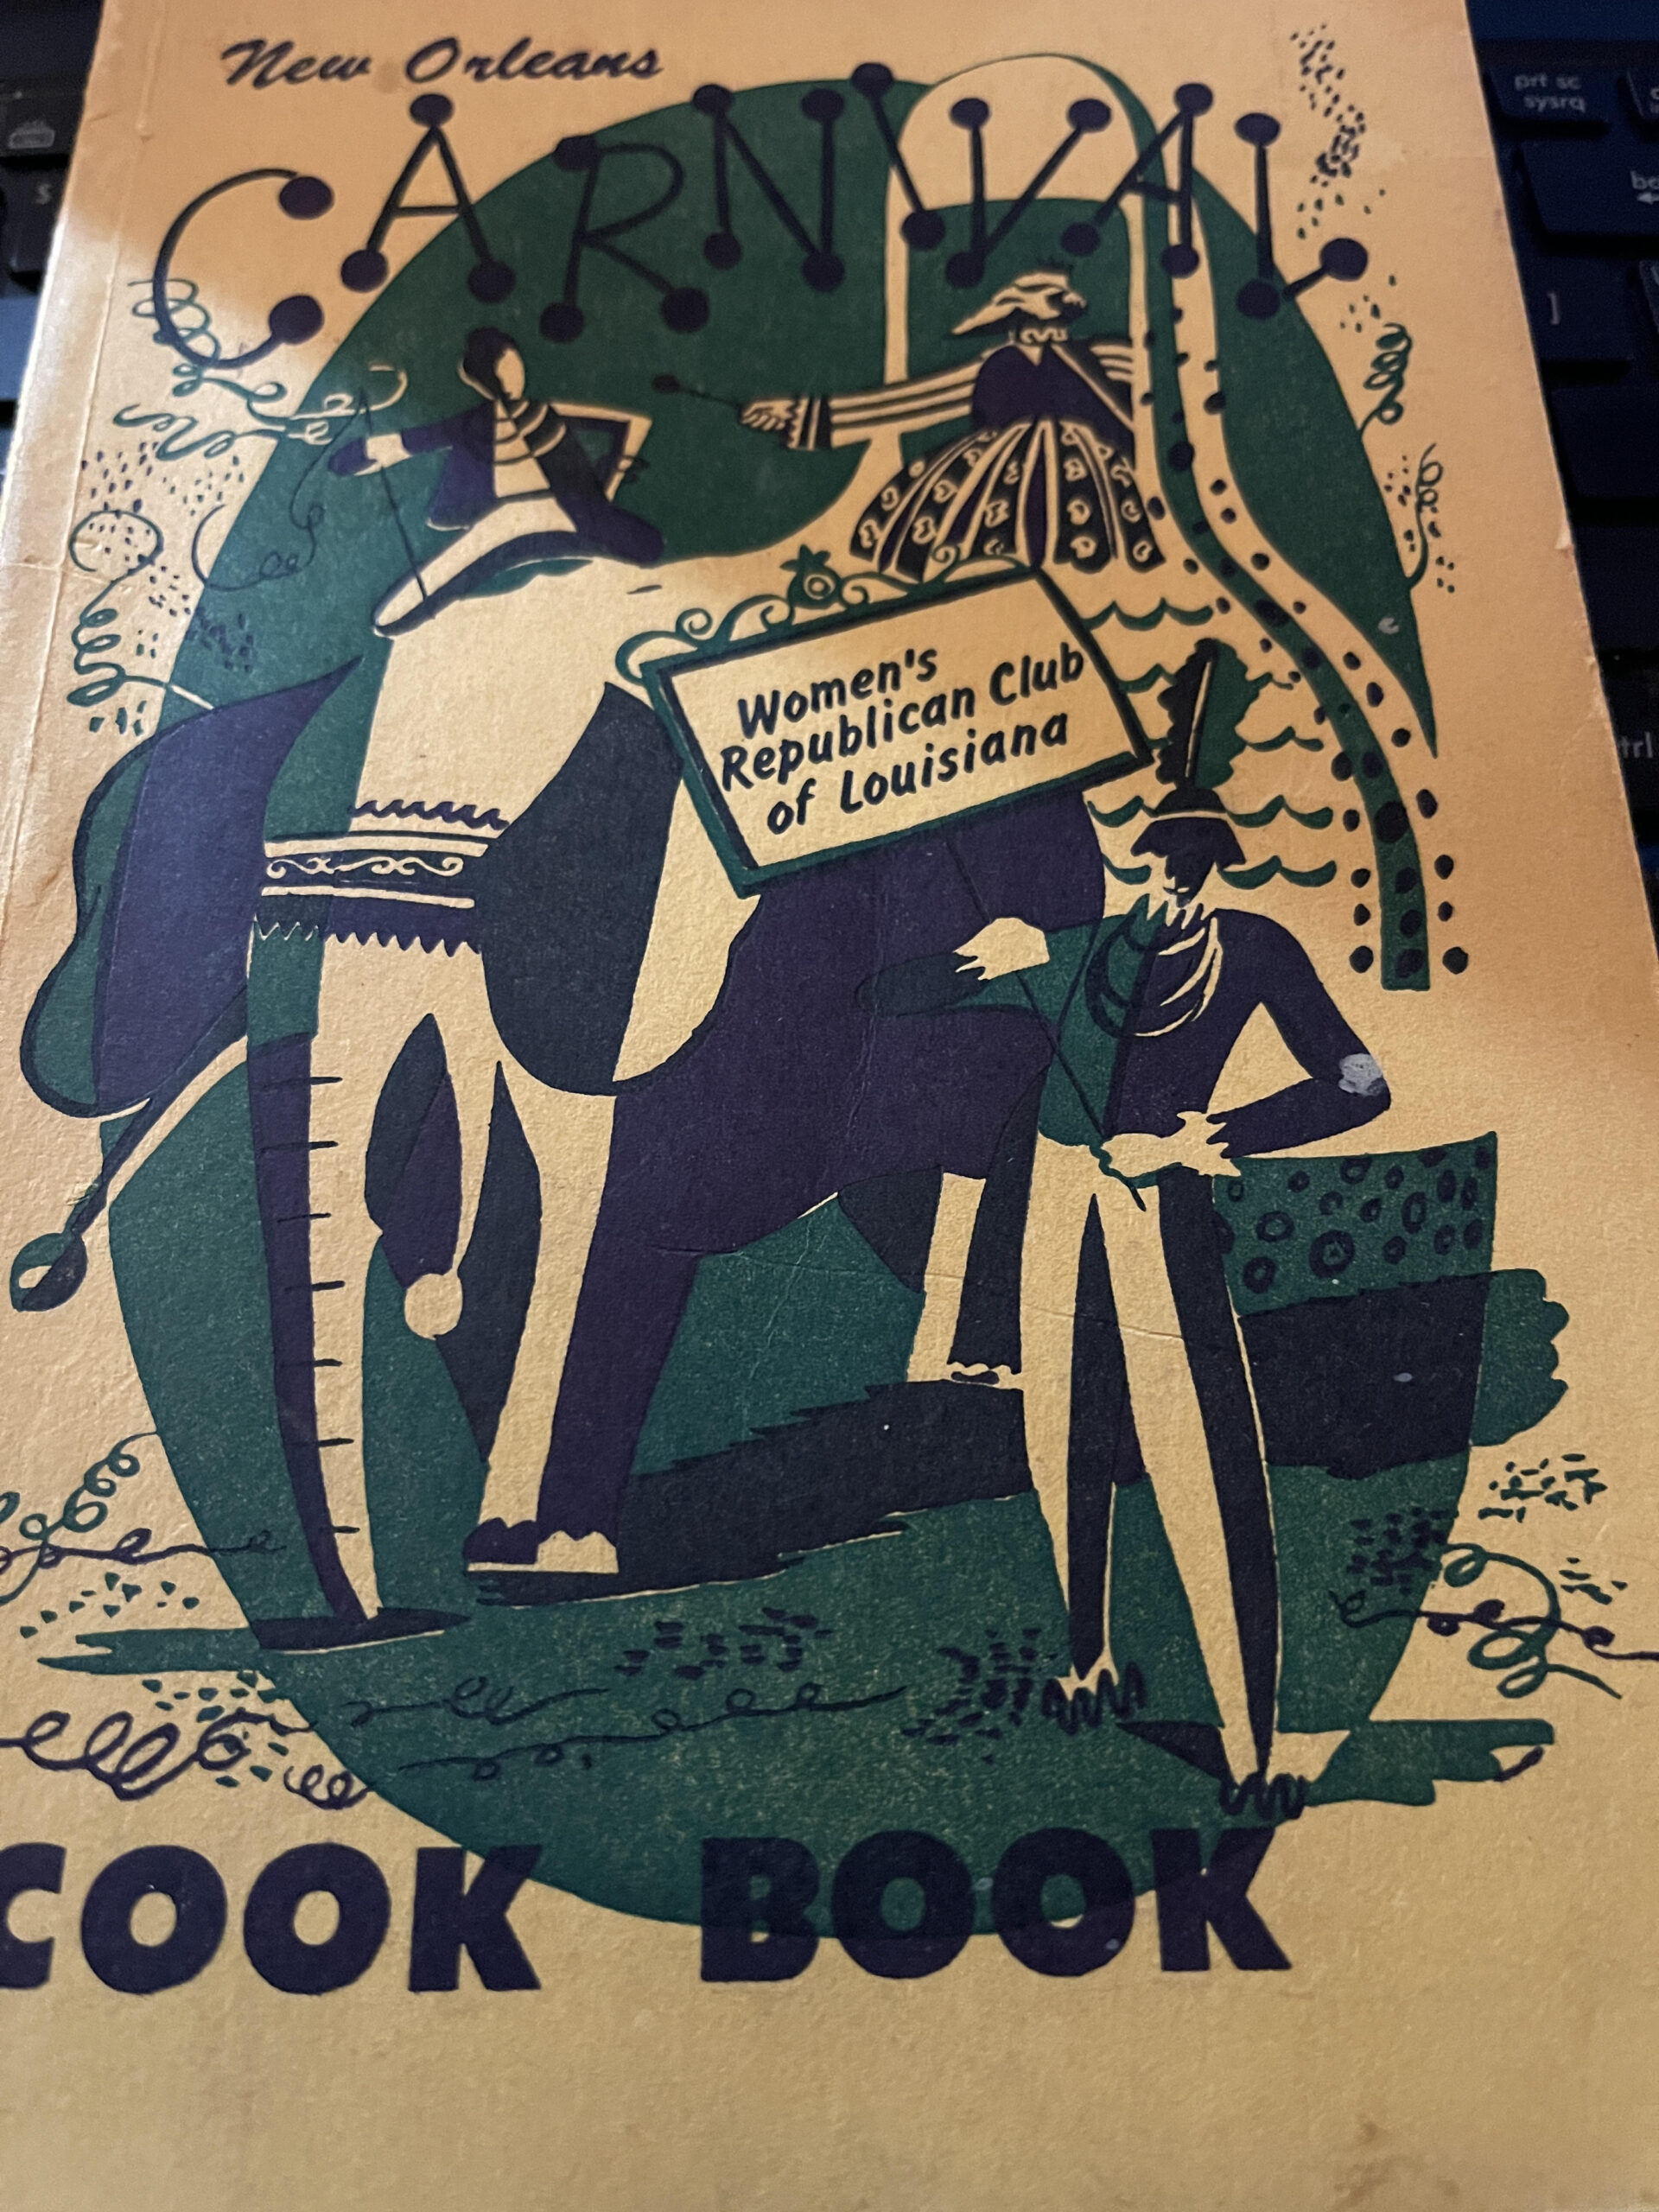 New Orleans Carnival Cook Book, 1951, Women's Republican Club